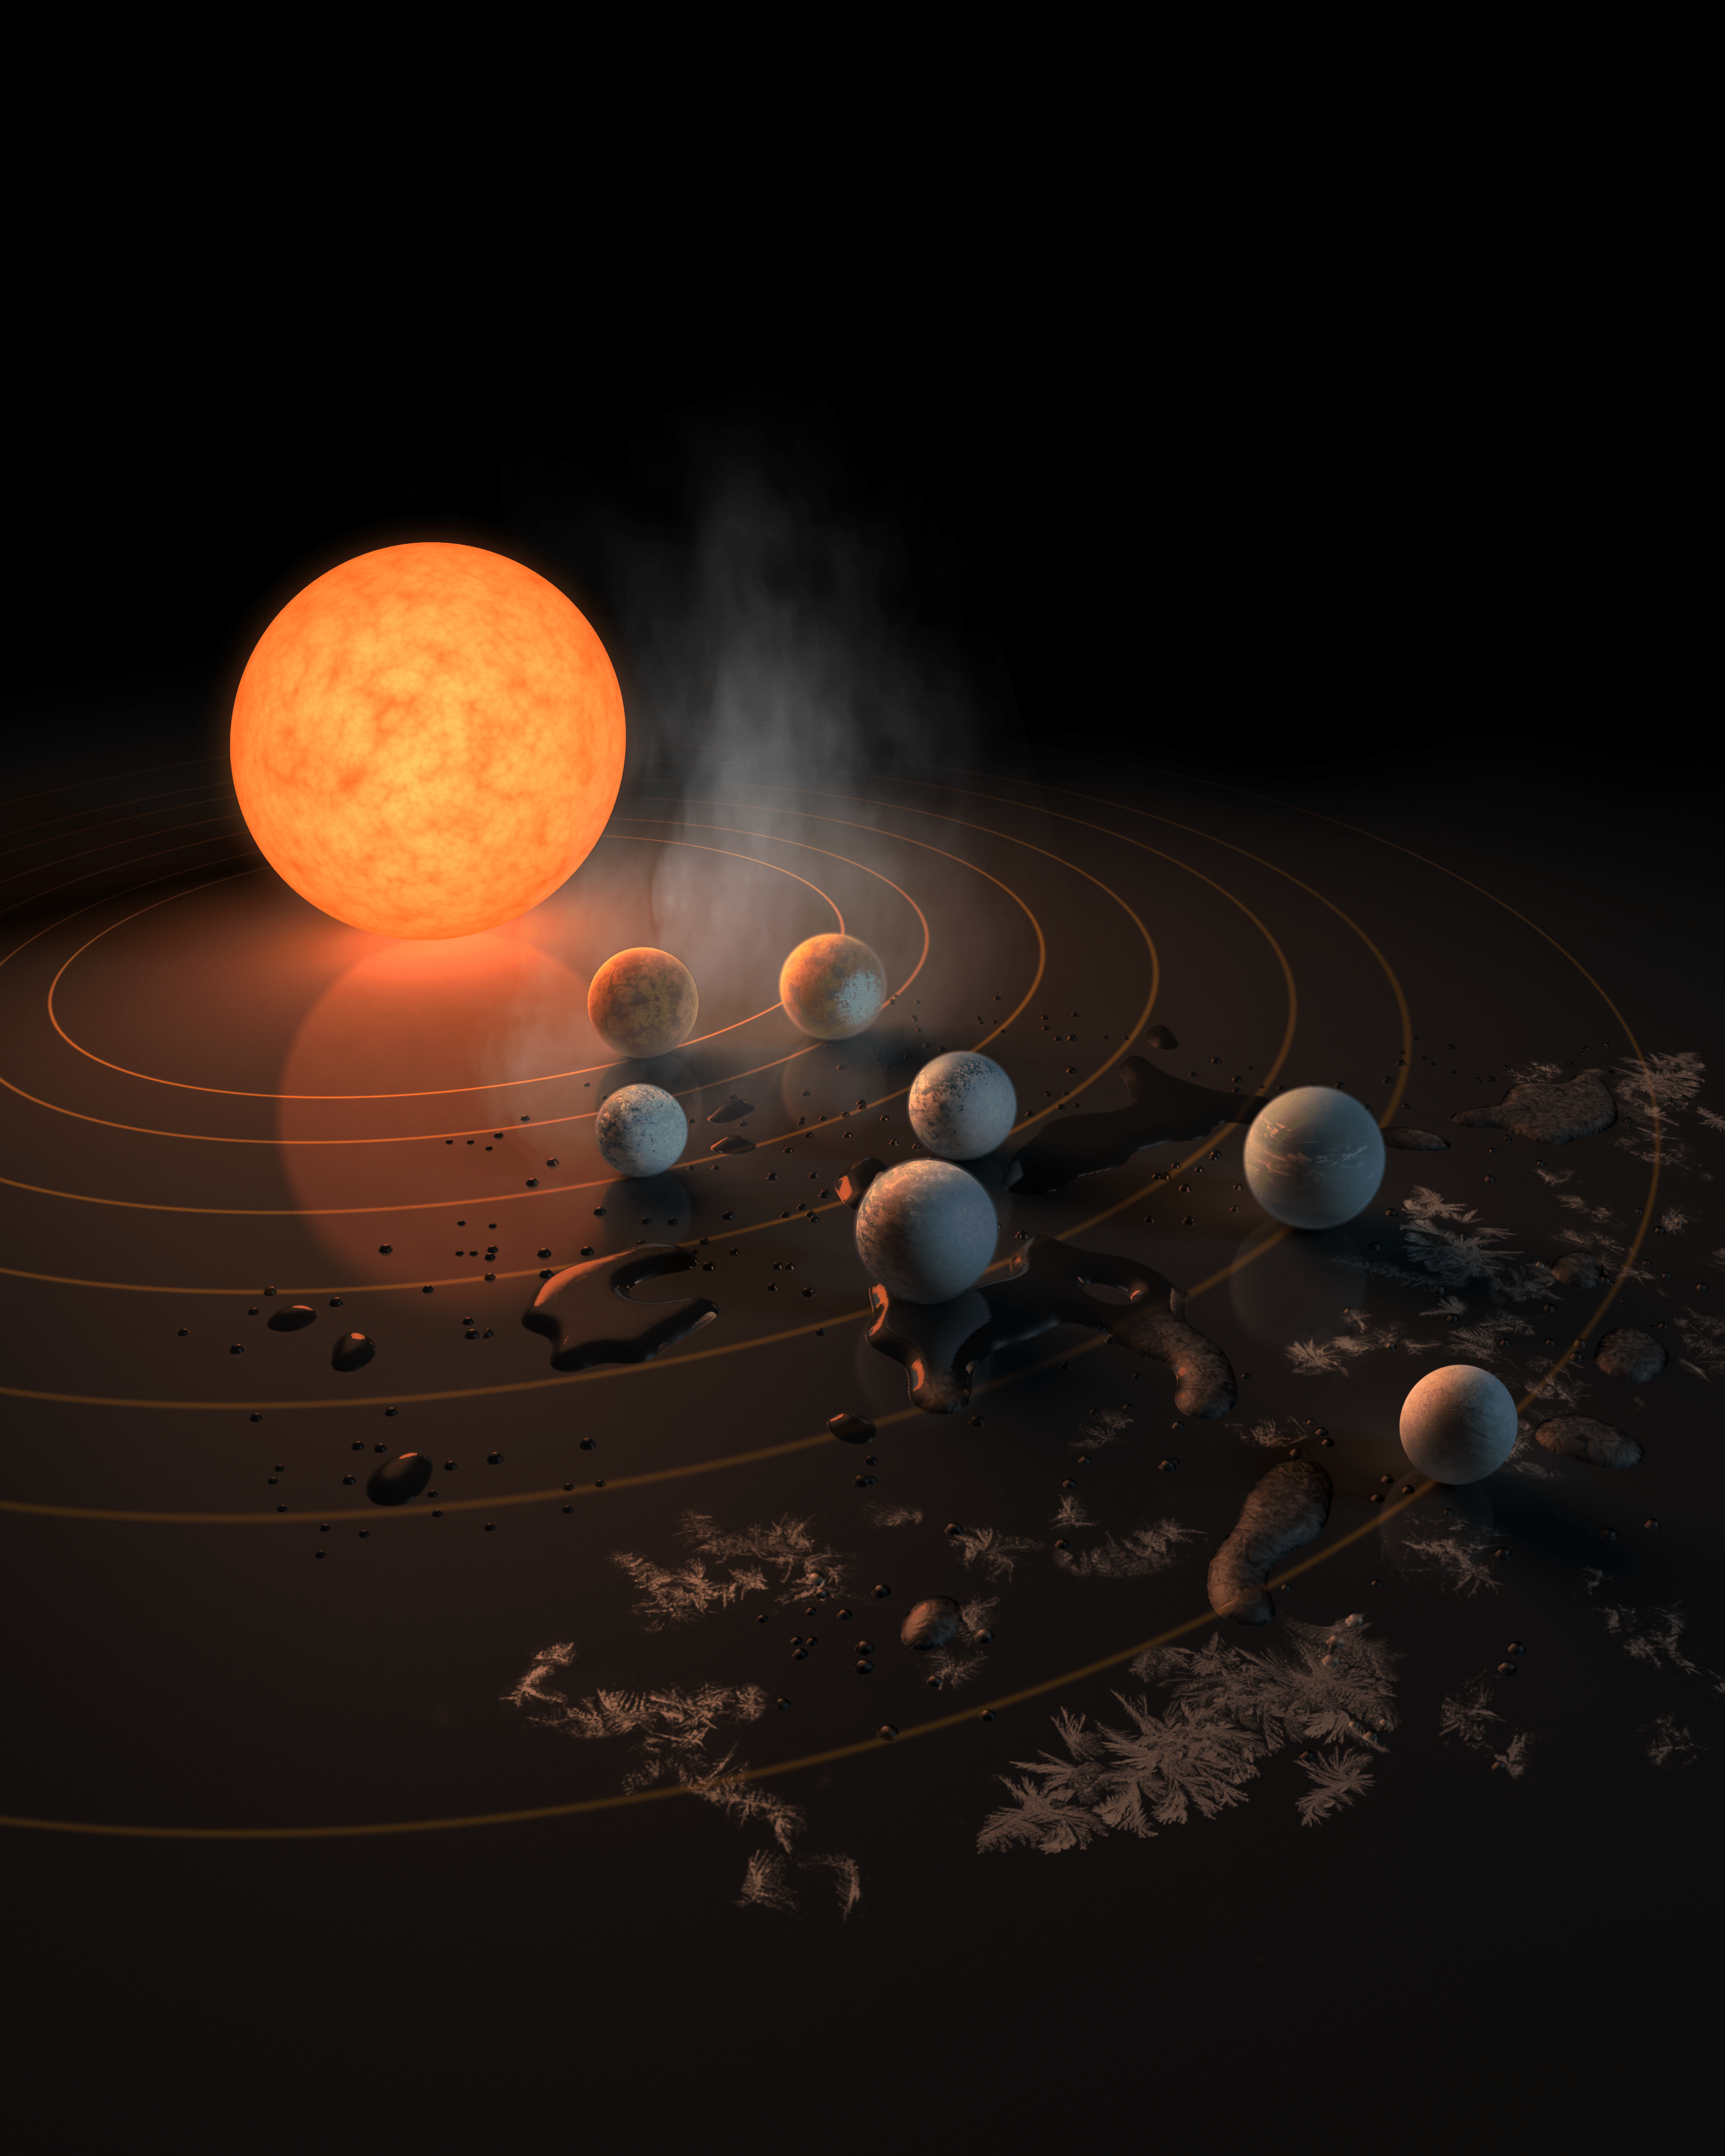 The TRAPPIST-1 star, an ultra-cool dwarf, has seven Earth-size planets orbiting it.